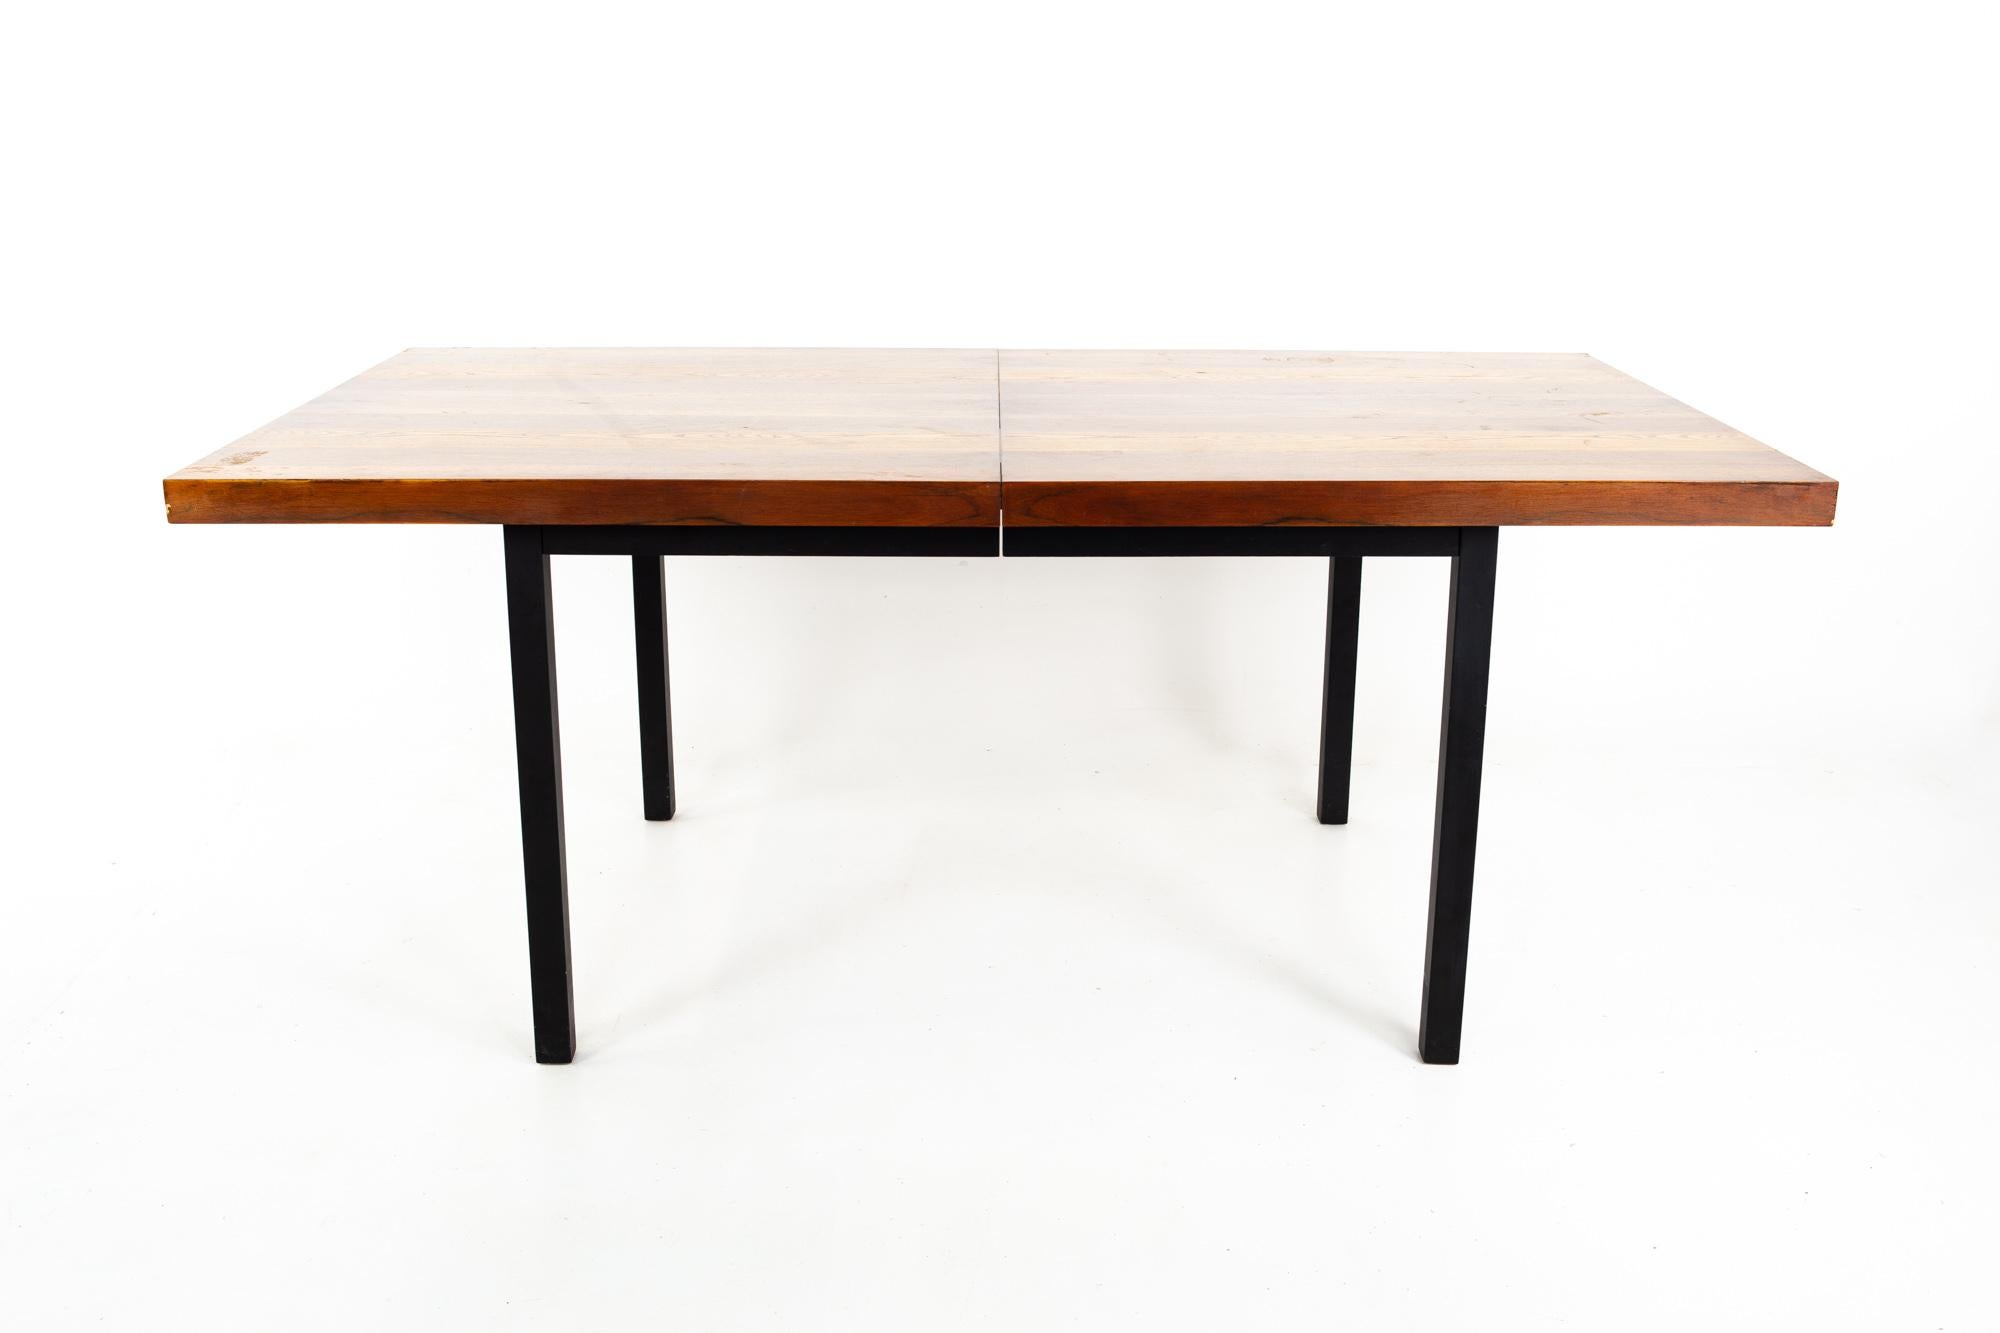 Milo Baughman for Directional Mid Century rosewood walnut and oak parsons dining table

Table measures: 72 wide x 39 deep x 29.25 inches high; each of the two leaves measure 18 inches wide for a total table width of 108 inches

This piece is